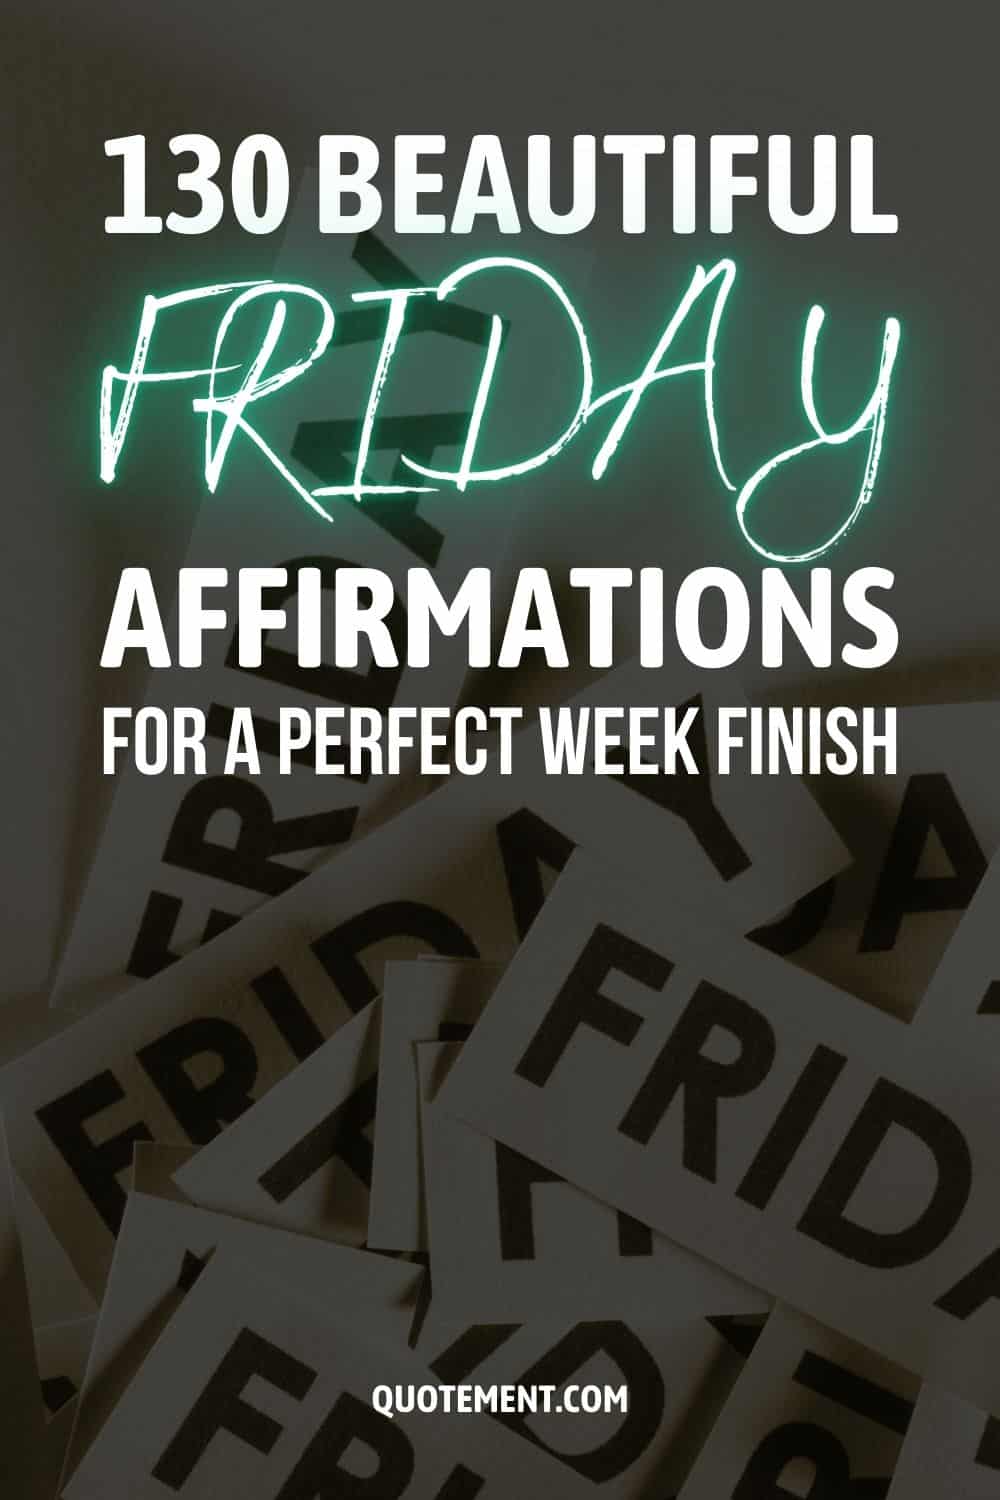 130 Beautiful Friday Affirmations For A Perfect Week Finish 